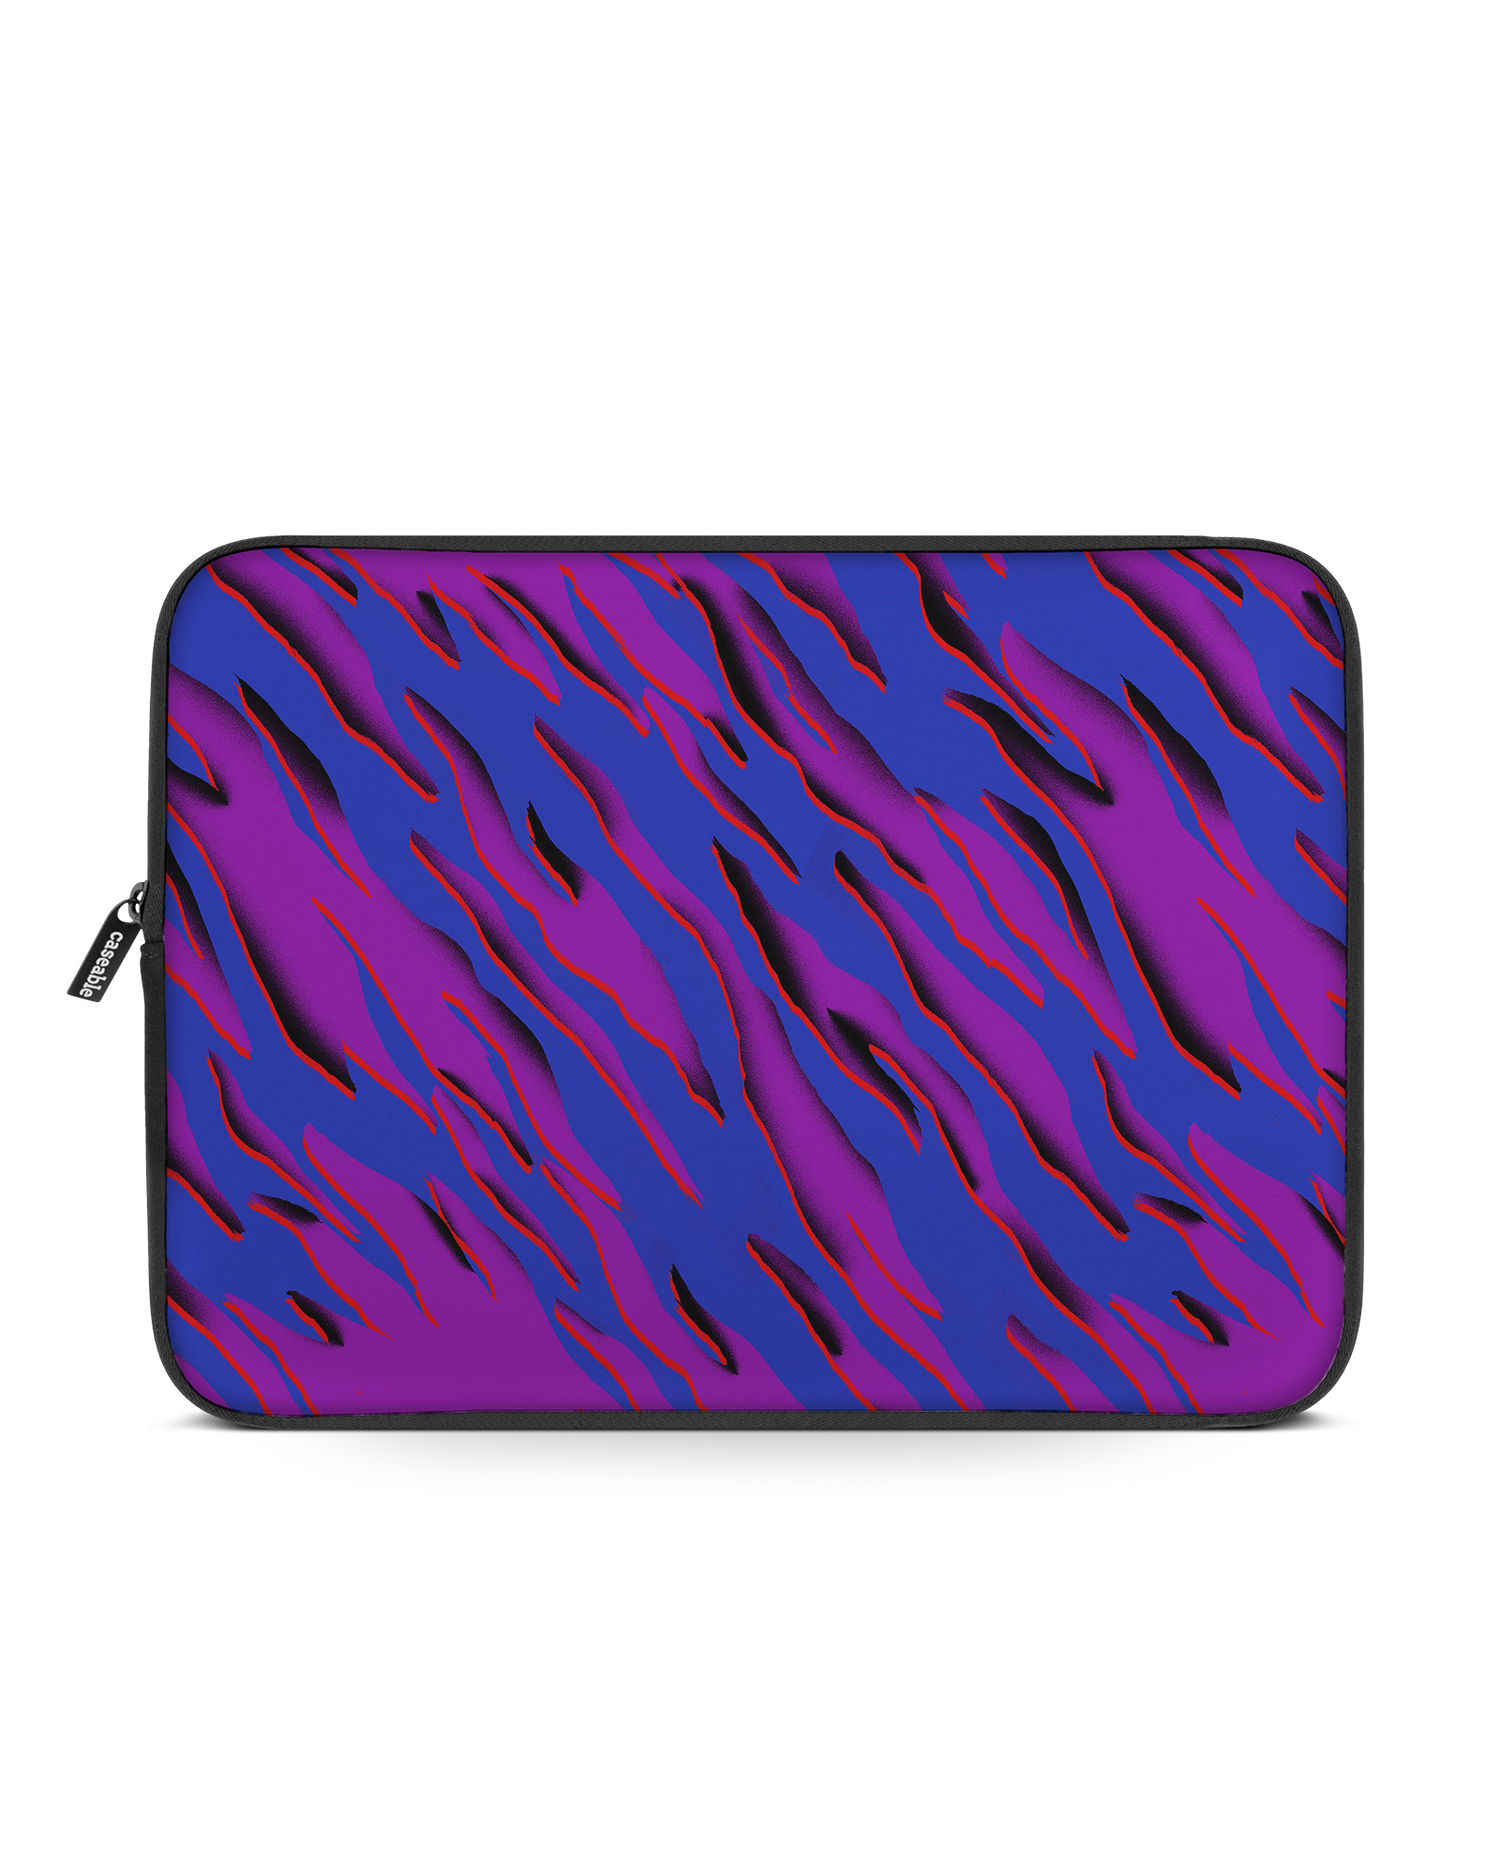 Electric Ocean 2 Laptop Case 15 inch: Front View